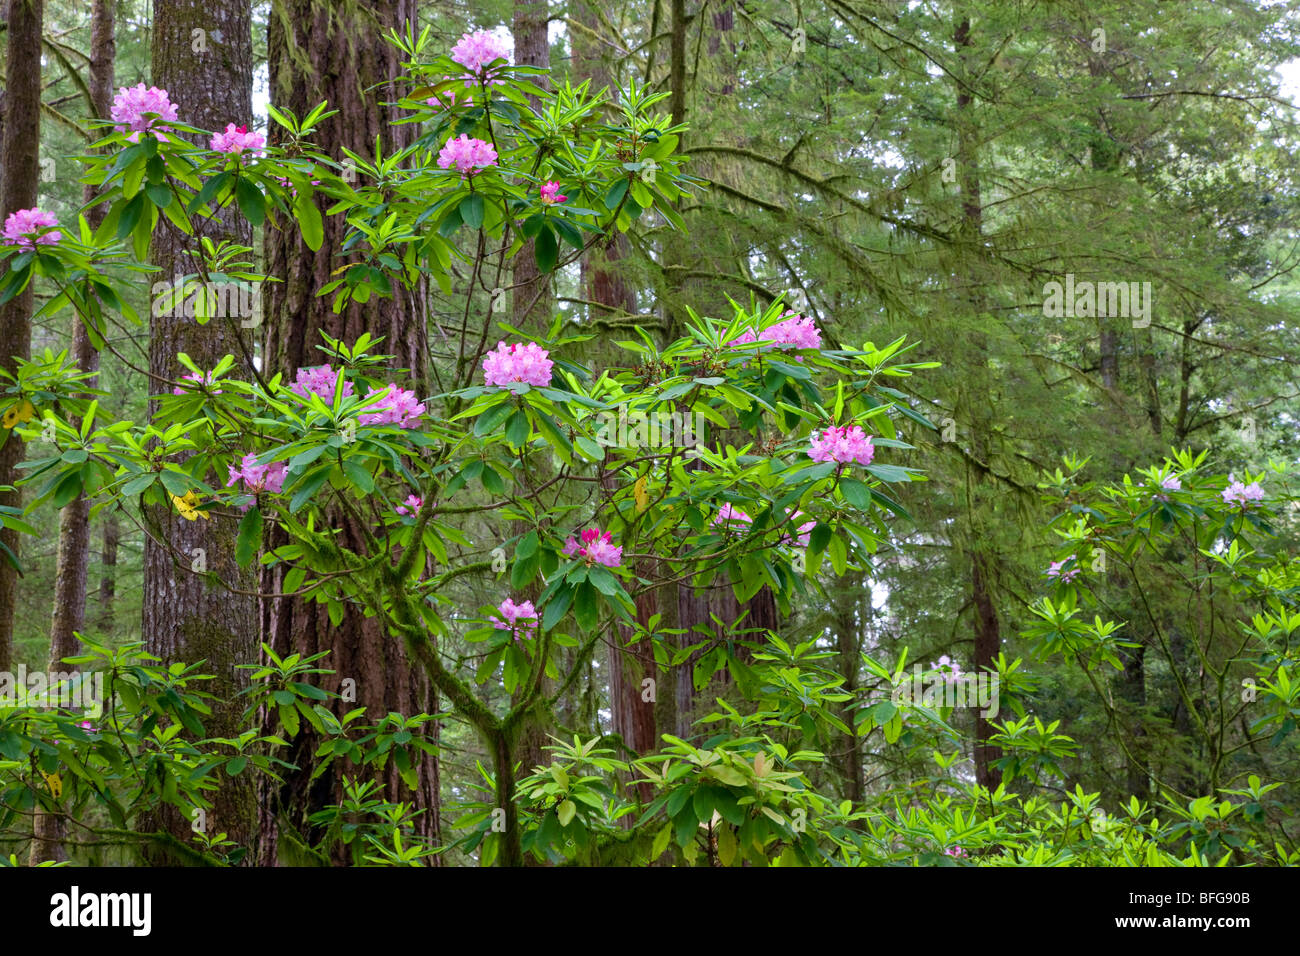 Rhododendron blooming in the Stout Grove – Jedediah Smith Redwoods State Park. Stock Photo